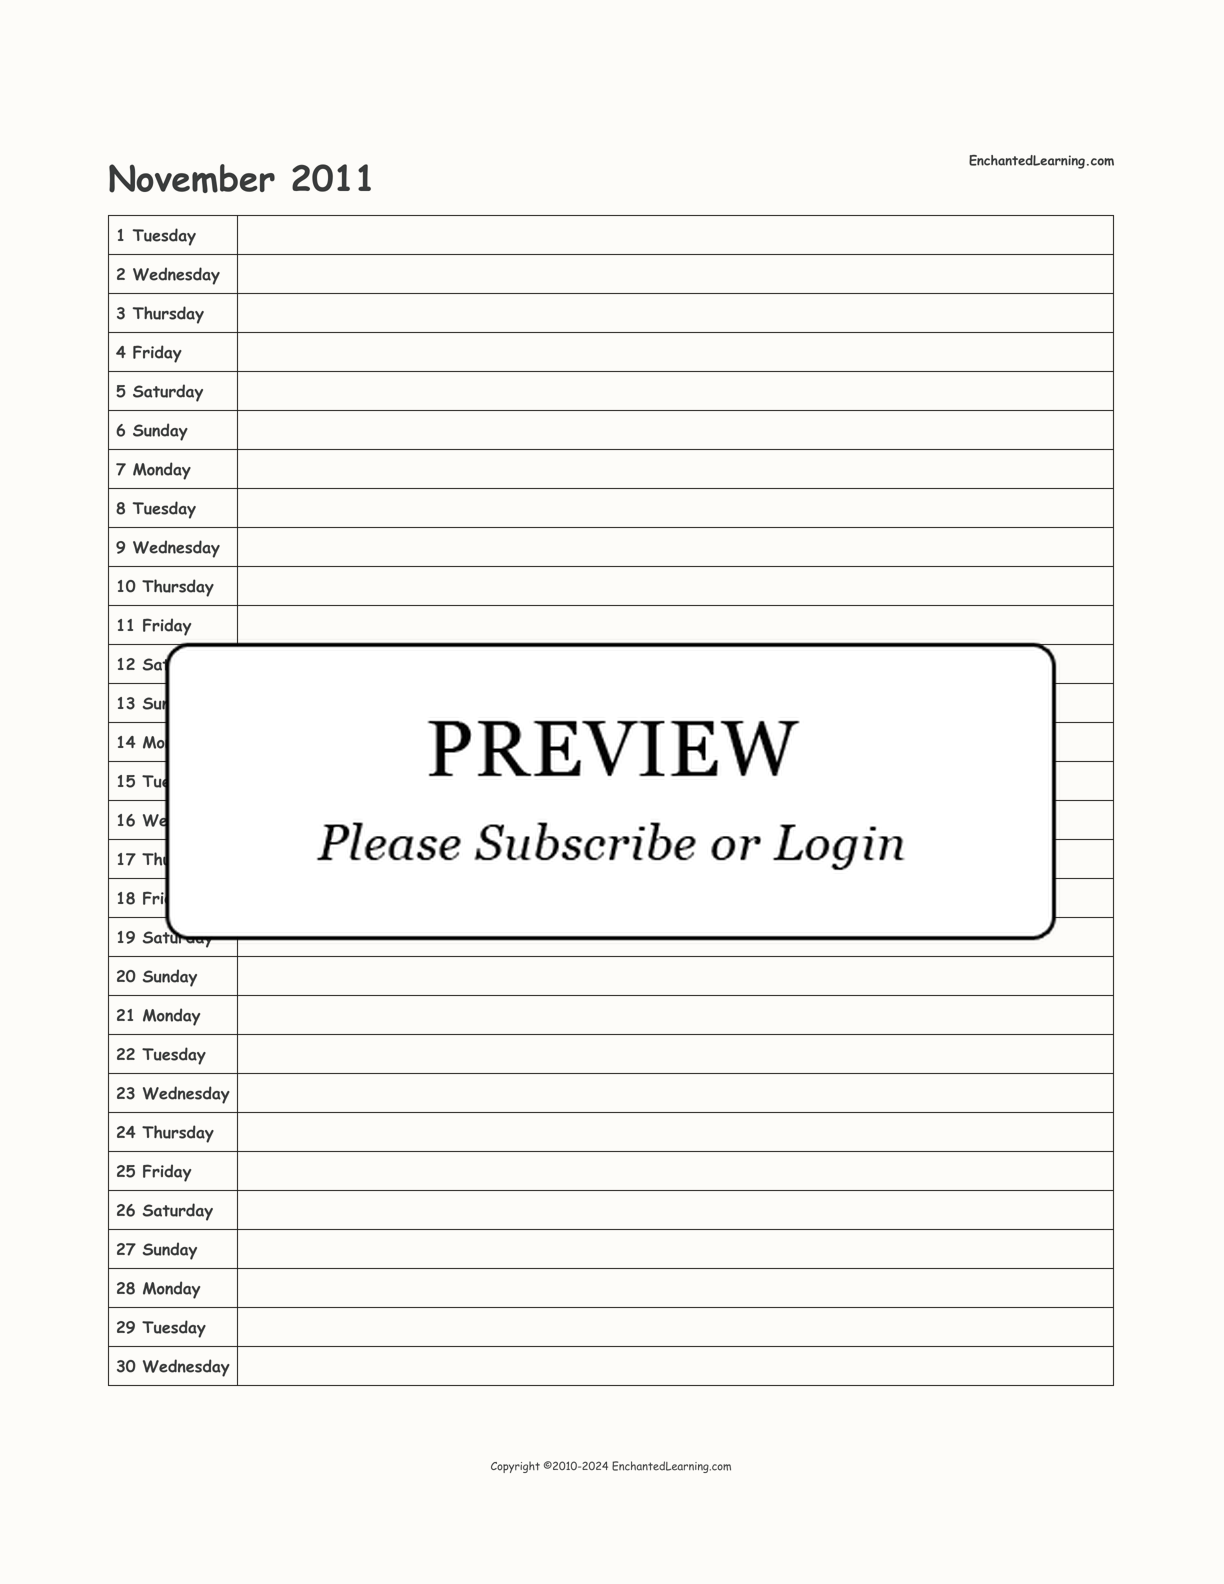 2011 Scheduling Calendar interactive printout page 11